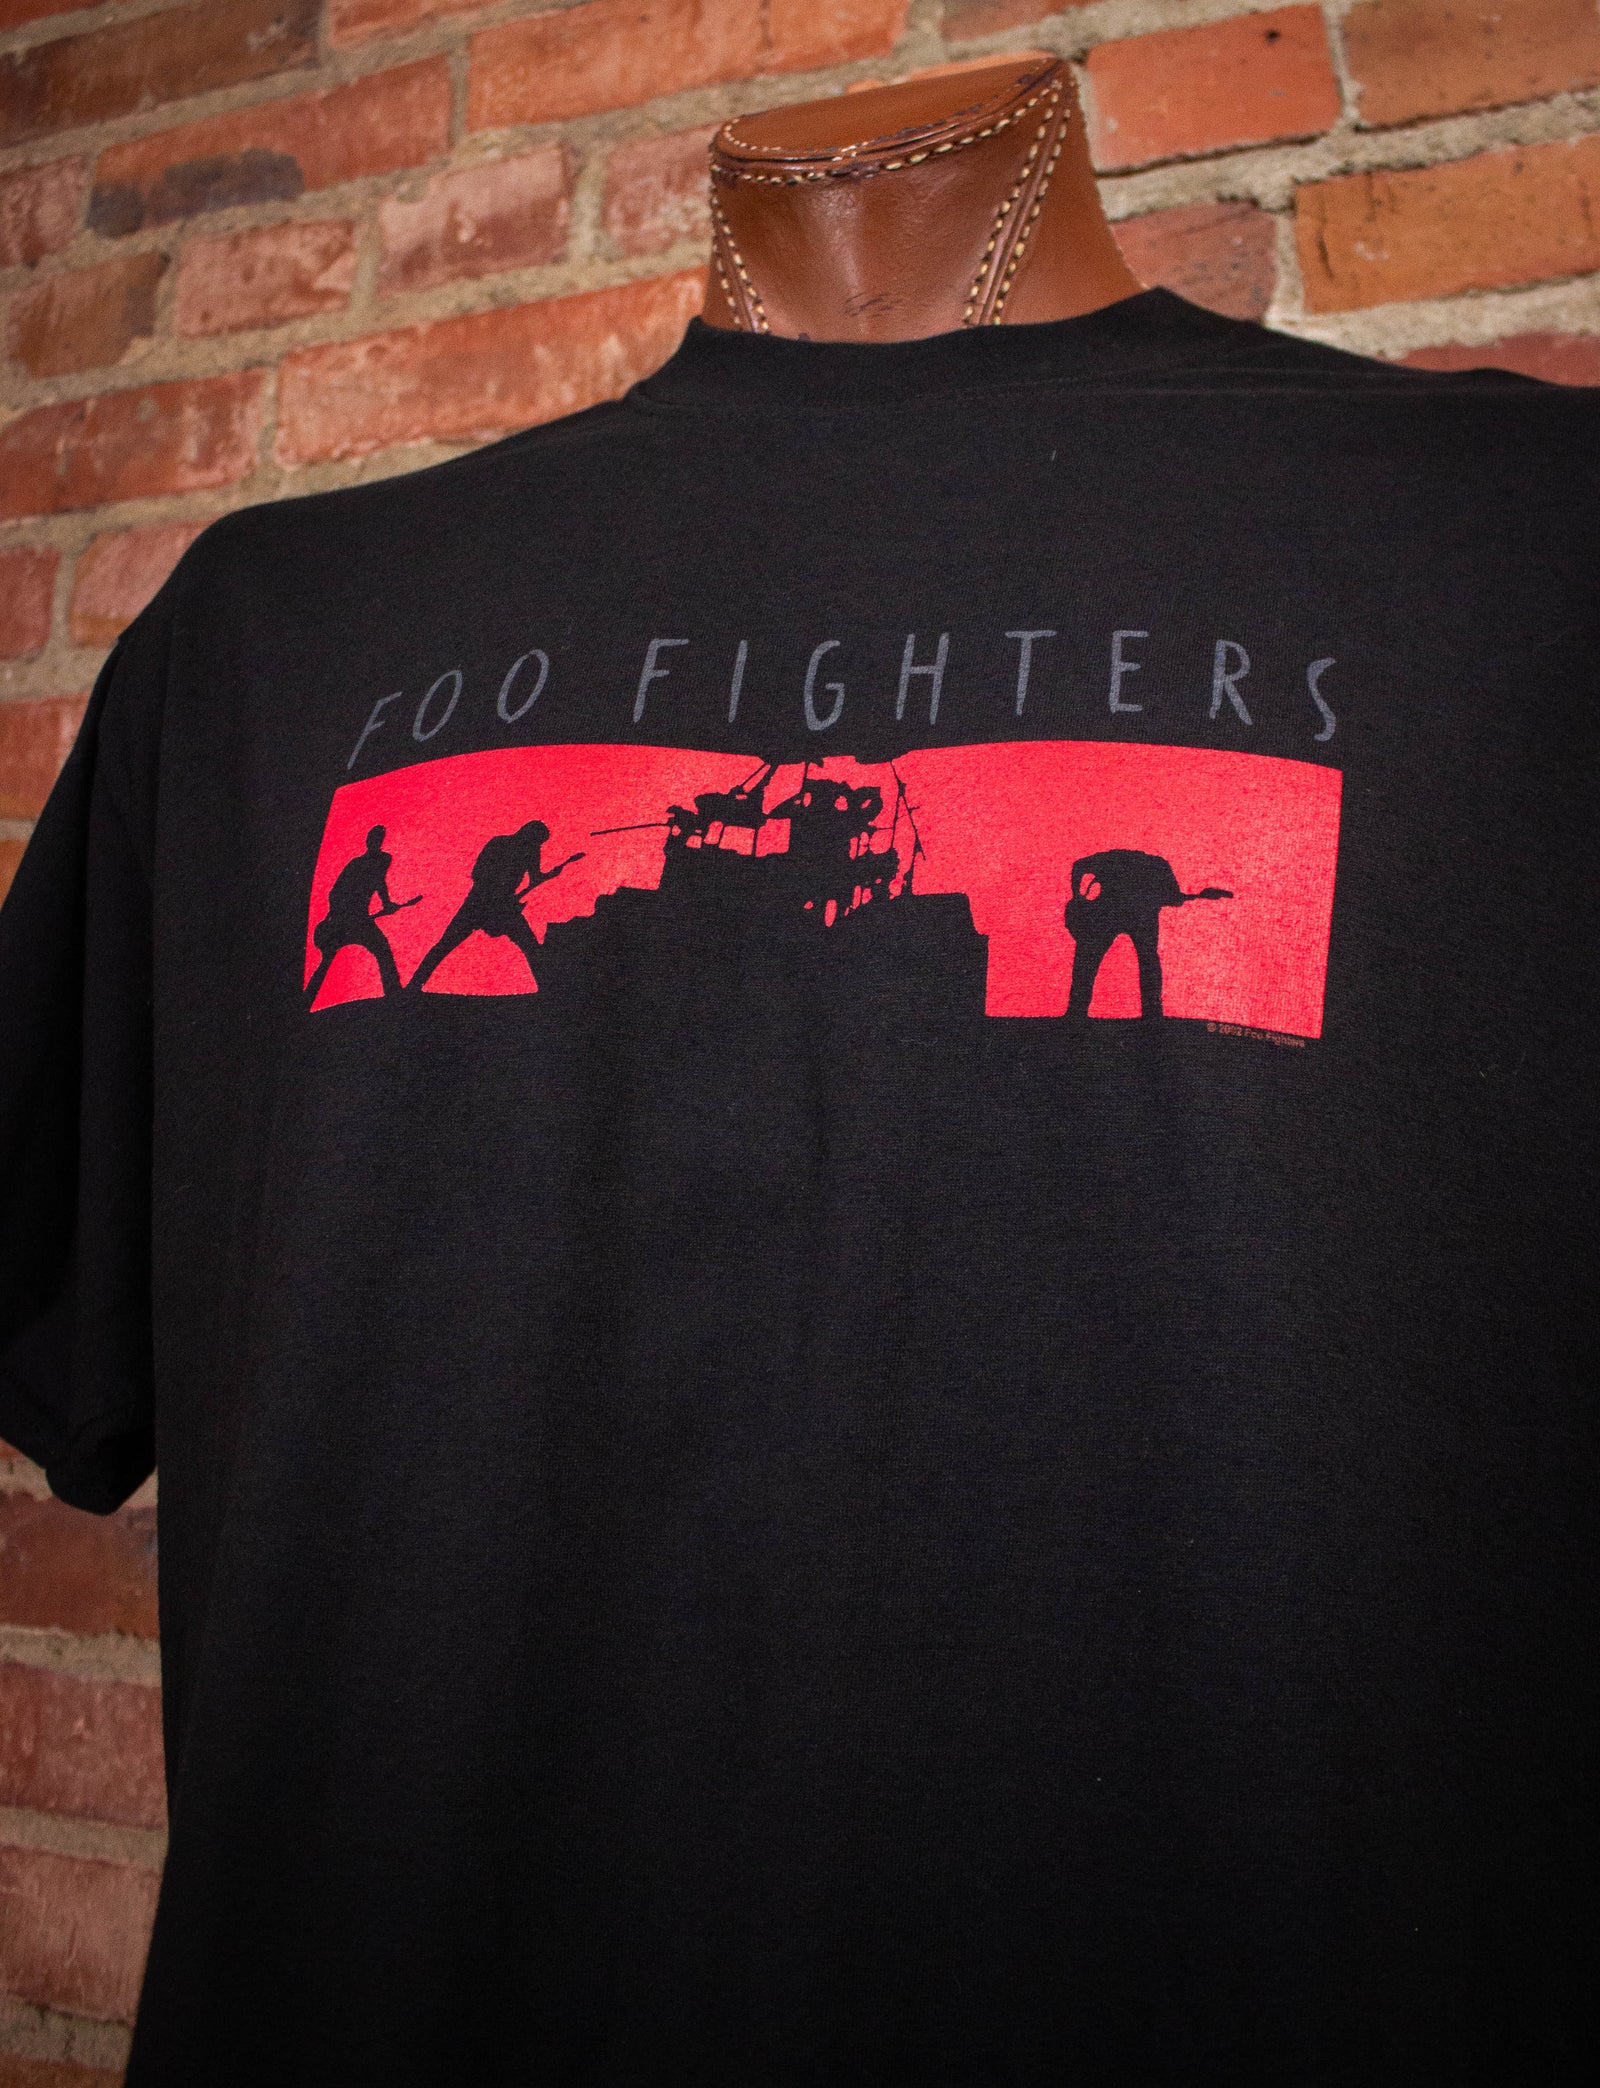 Vintage Foo Fighters One By One Concert T Shirt 2002 Black XL